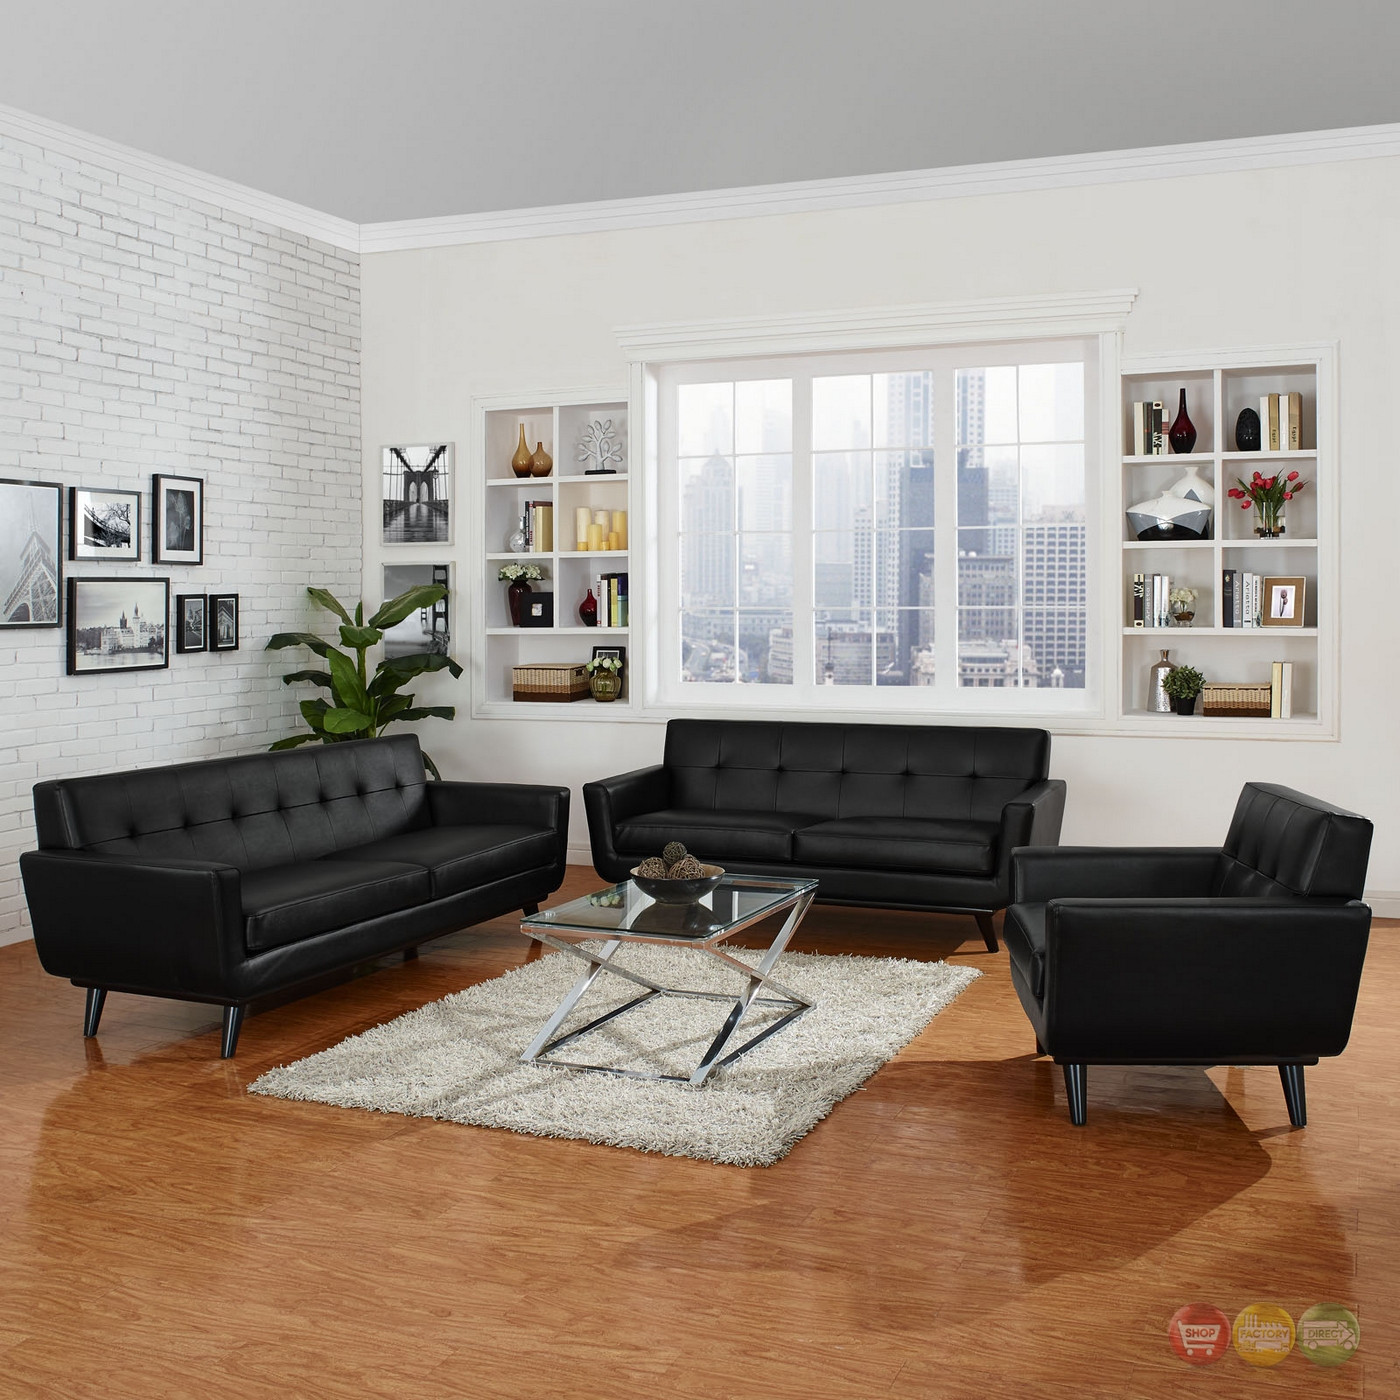 Modern Leather Living Room Set
 Mid Century Modern Engage 3pc Button Tufted Leather Living